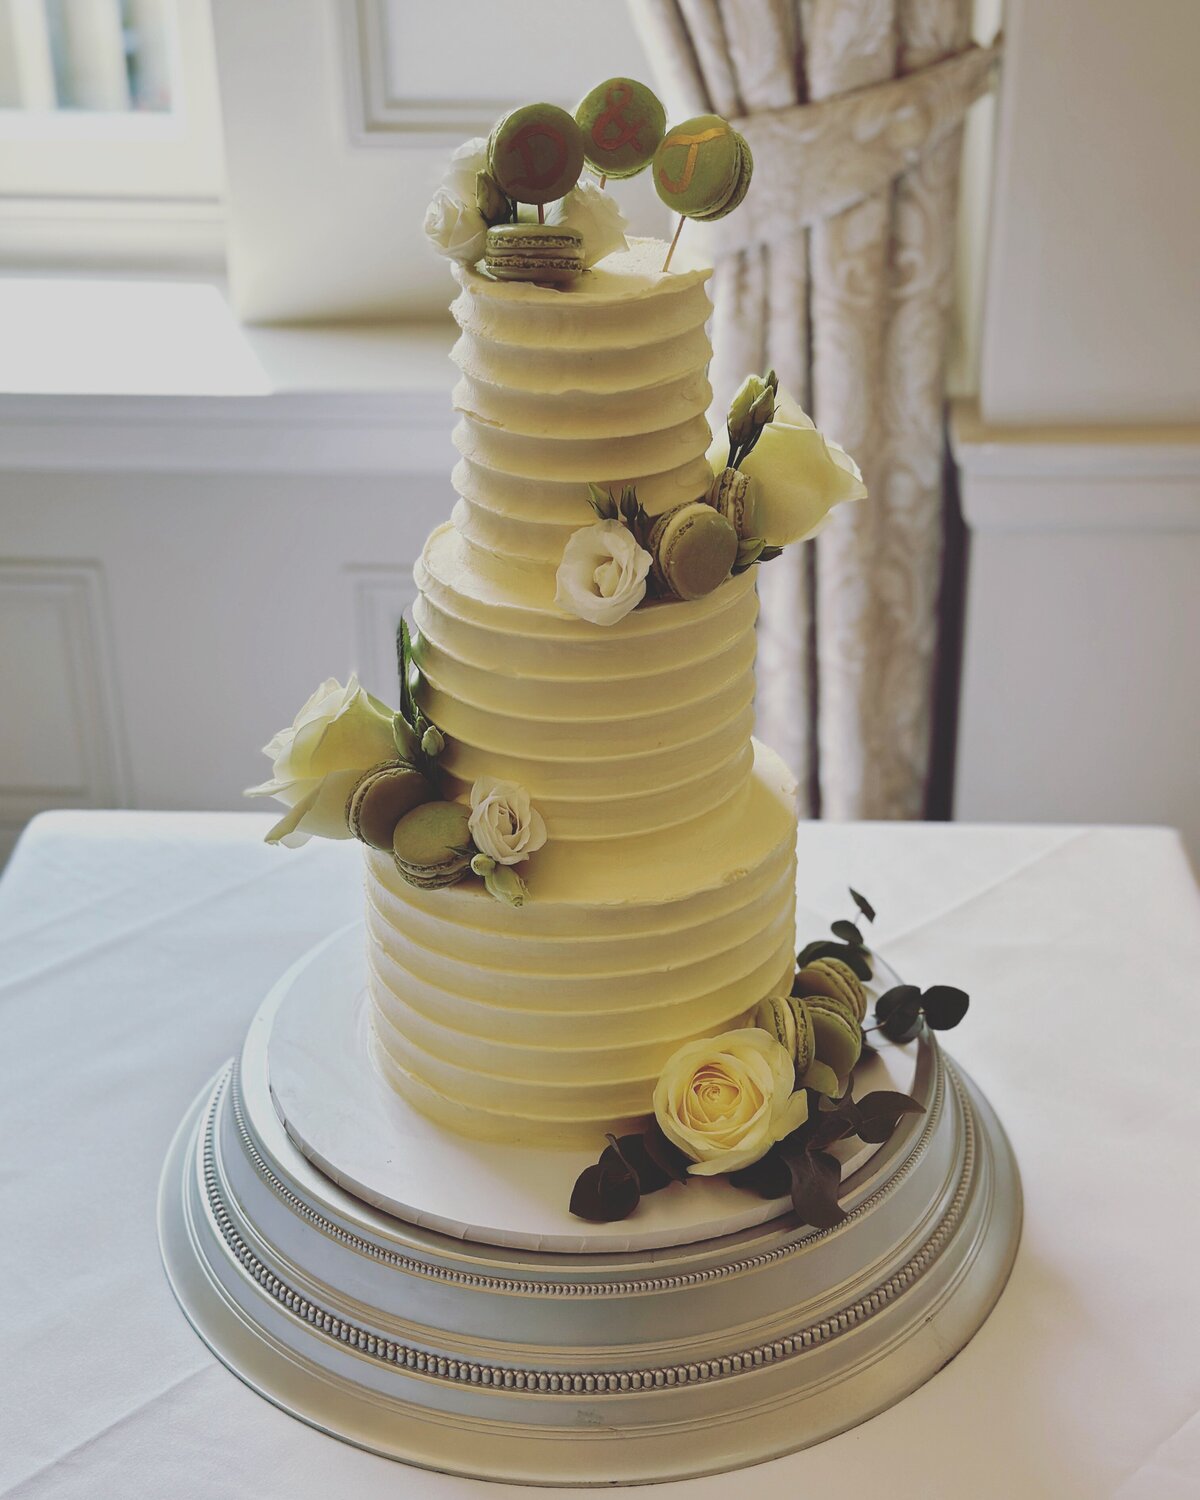 layers-graces-combed-buttercream-wedding-cake-downhall-flowers-macarons-may23